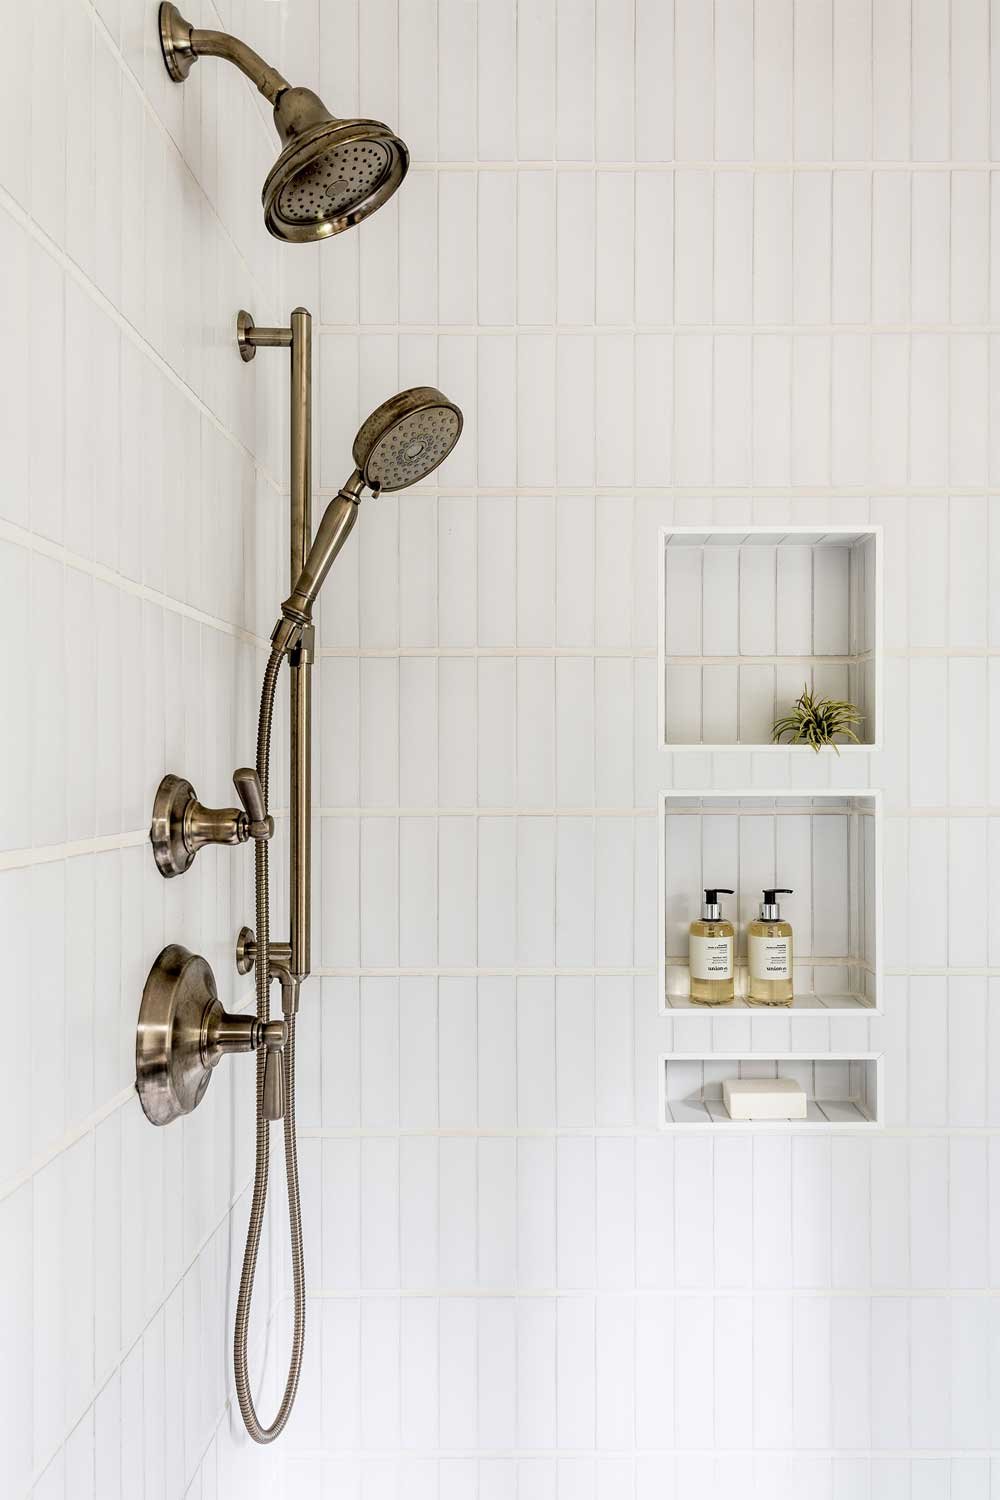 Designing A Shower Niche That’s Functional + Pretty